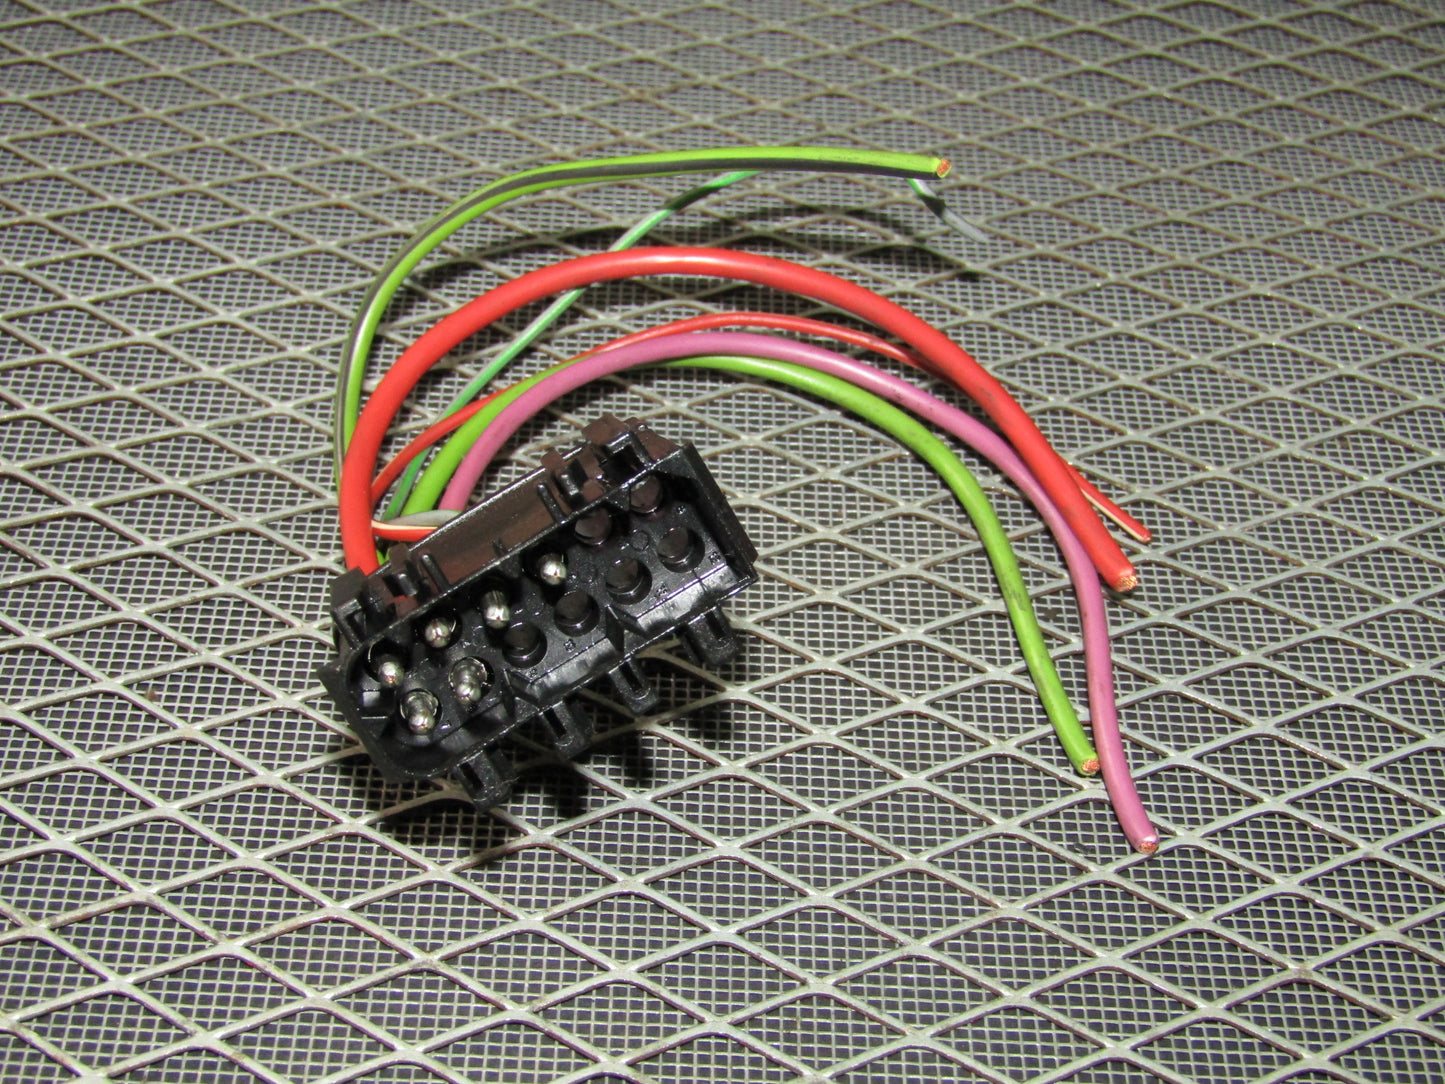 92 93 94 95 BMW 325 OEM Steering Ignition Switch Cylinder Lock Pigtail Harness